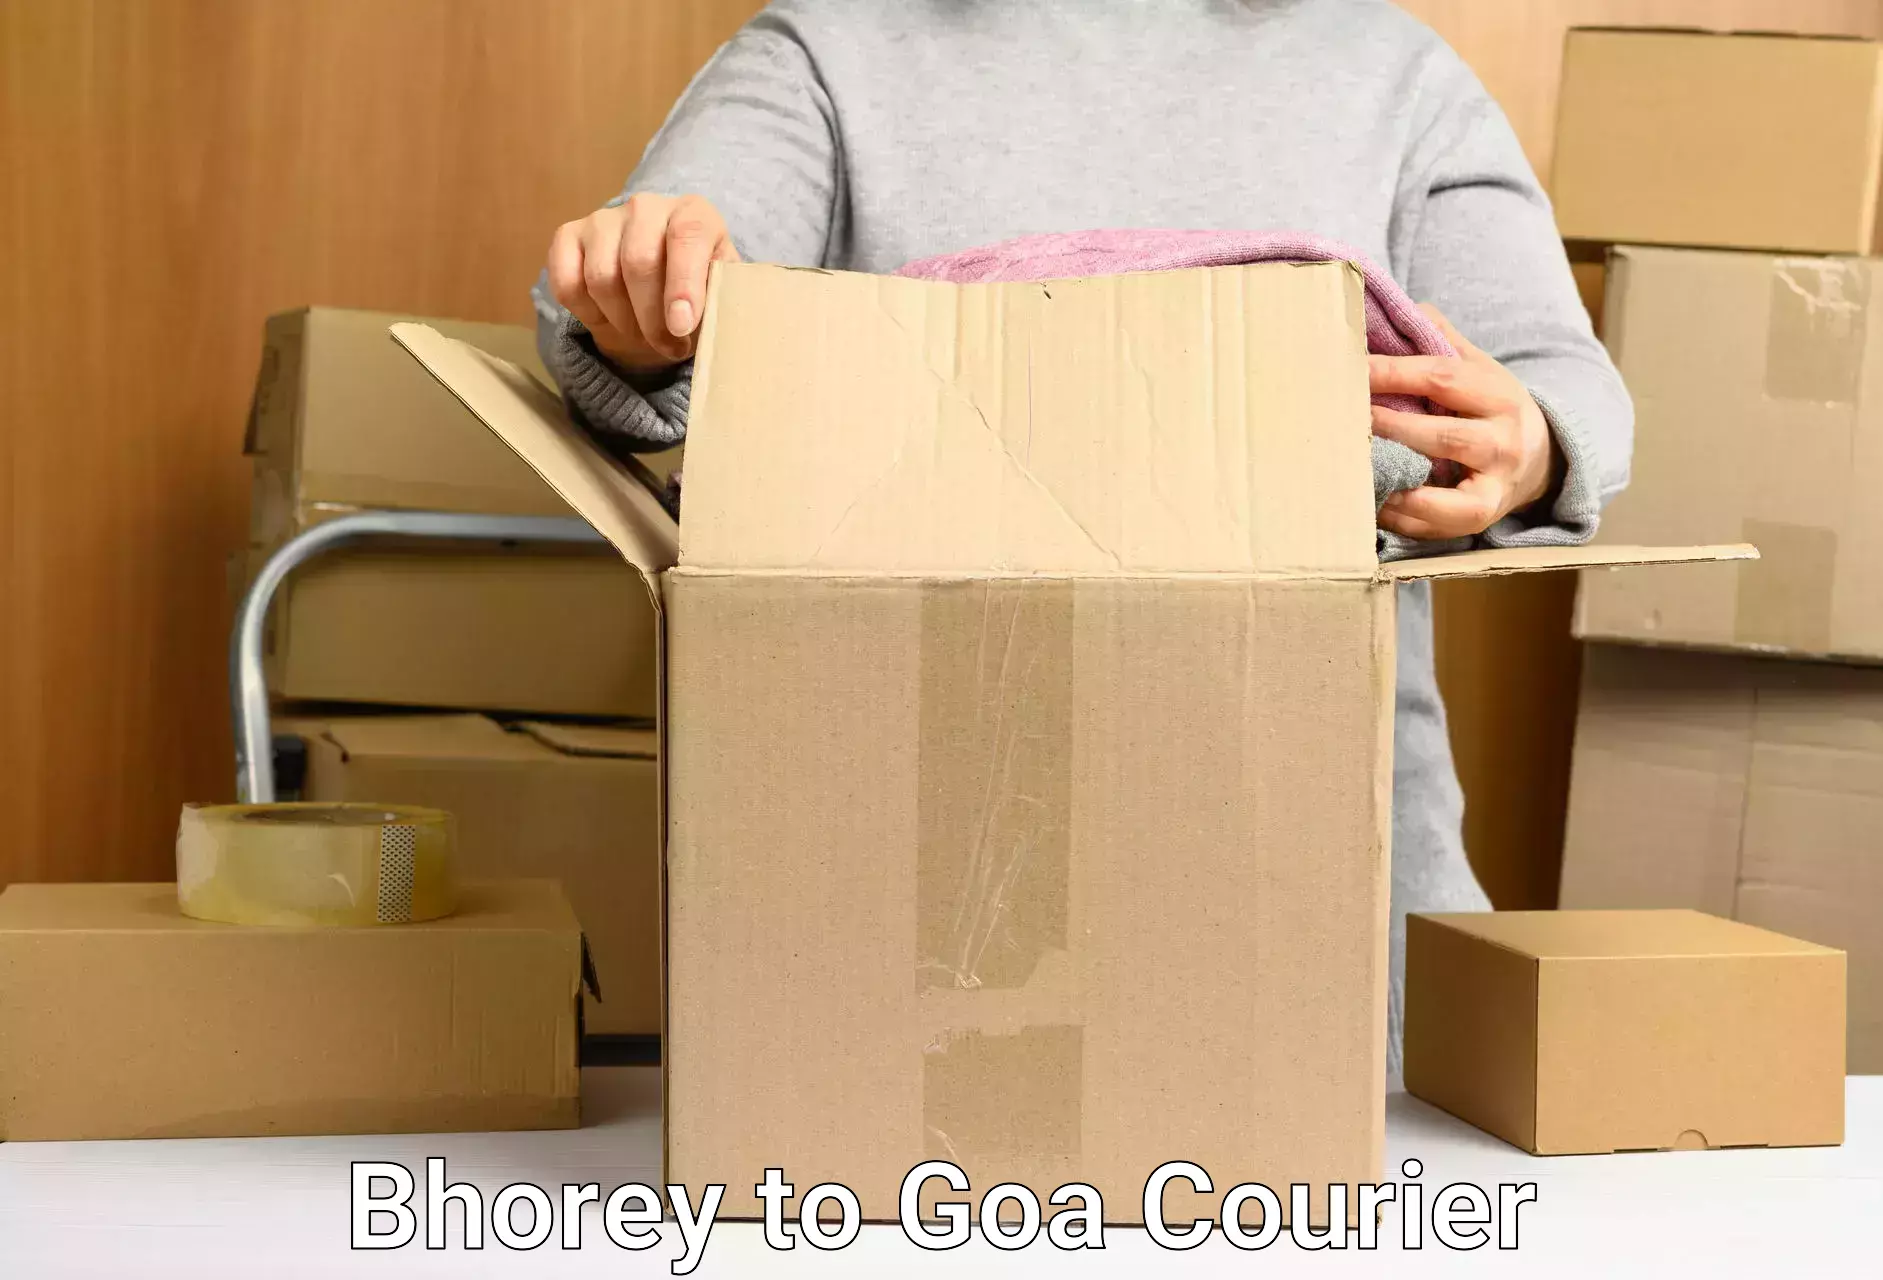 State-of-the-art courier technology Bhorey to Goa